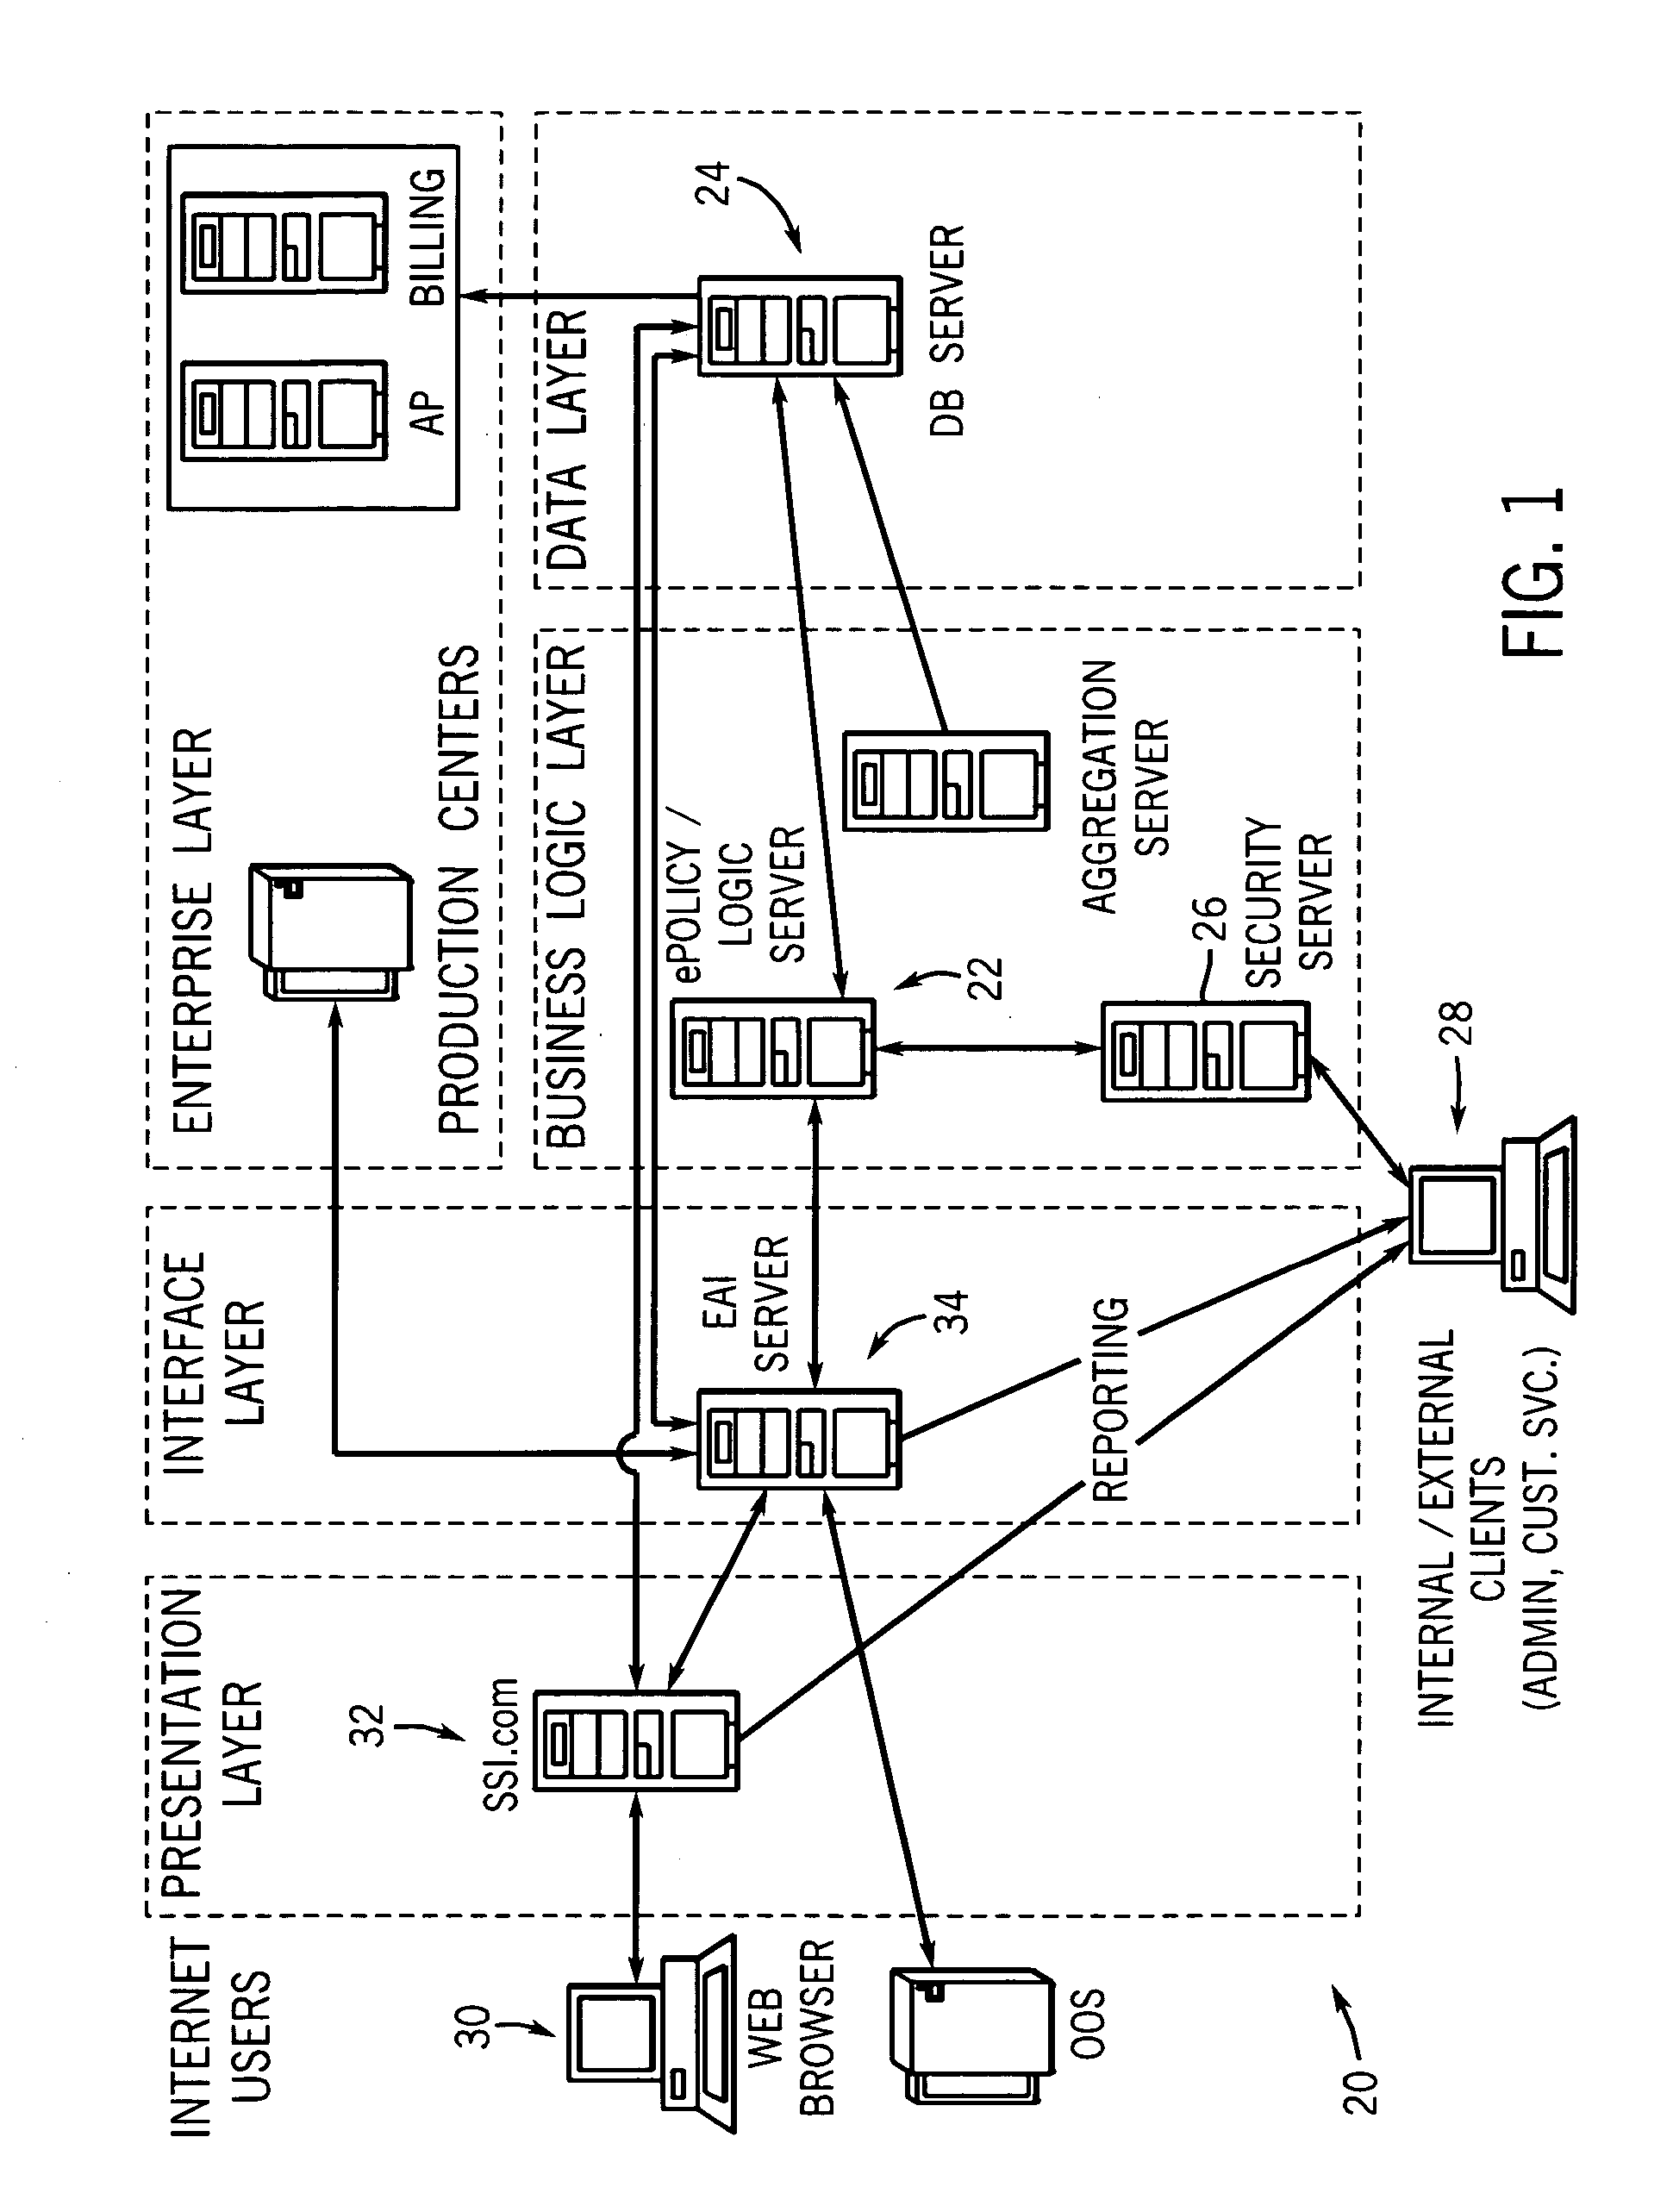 Loan underwriting system and method